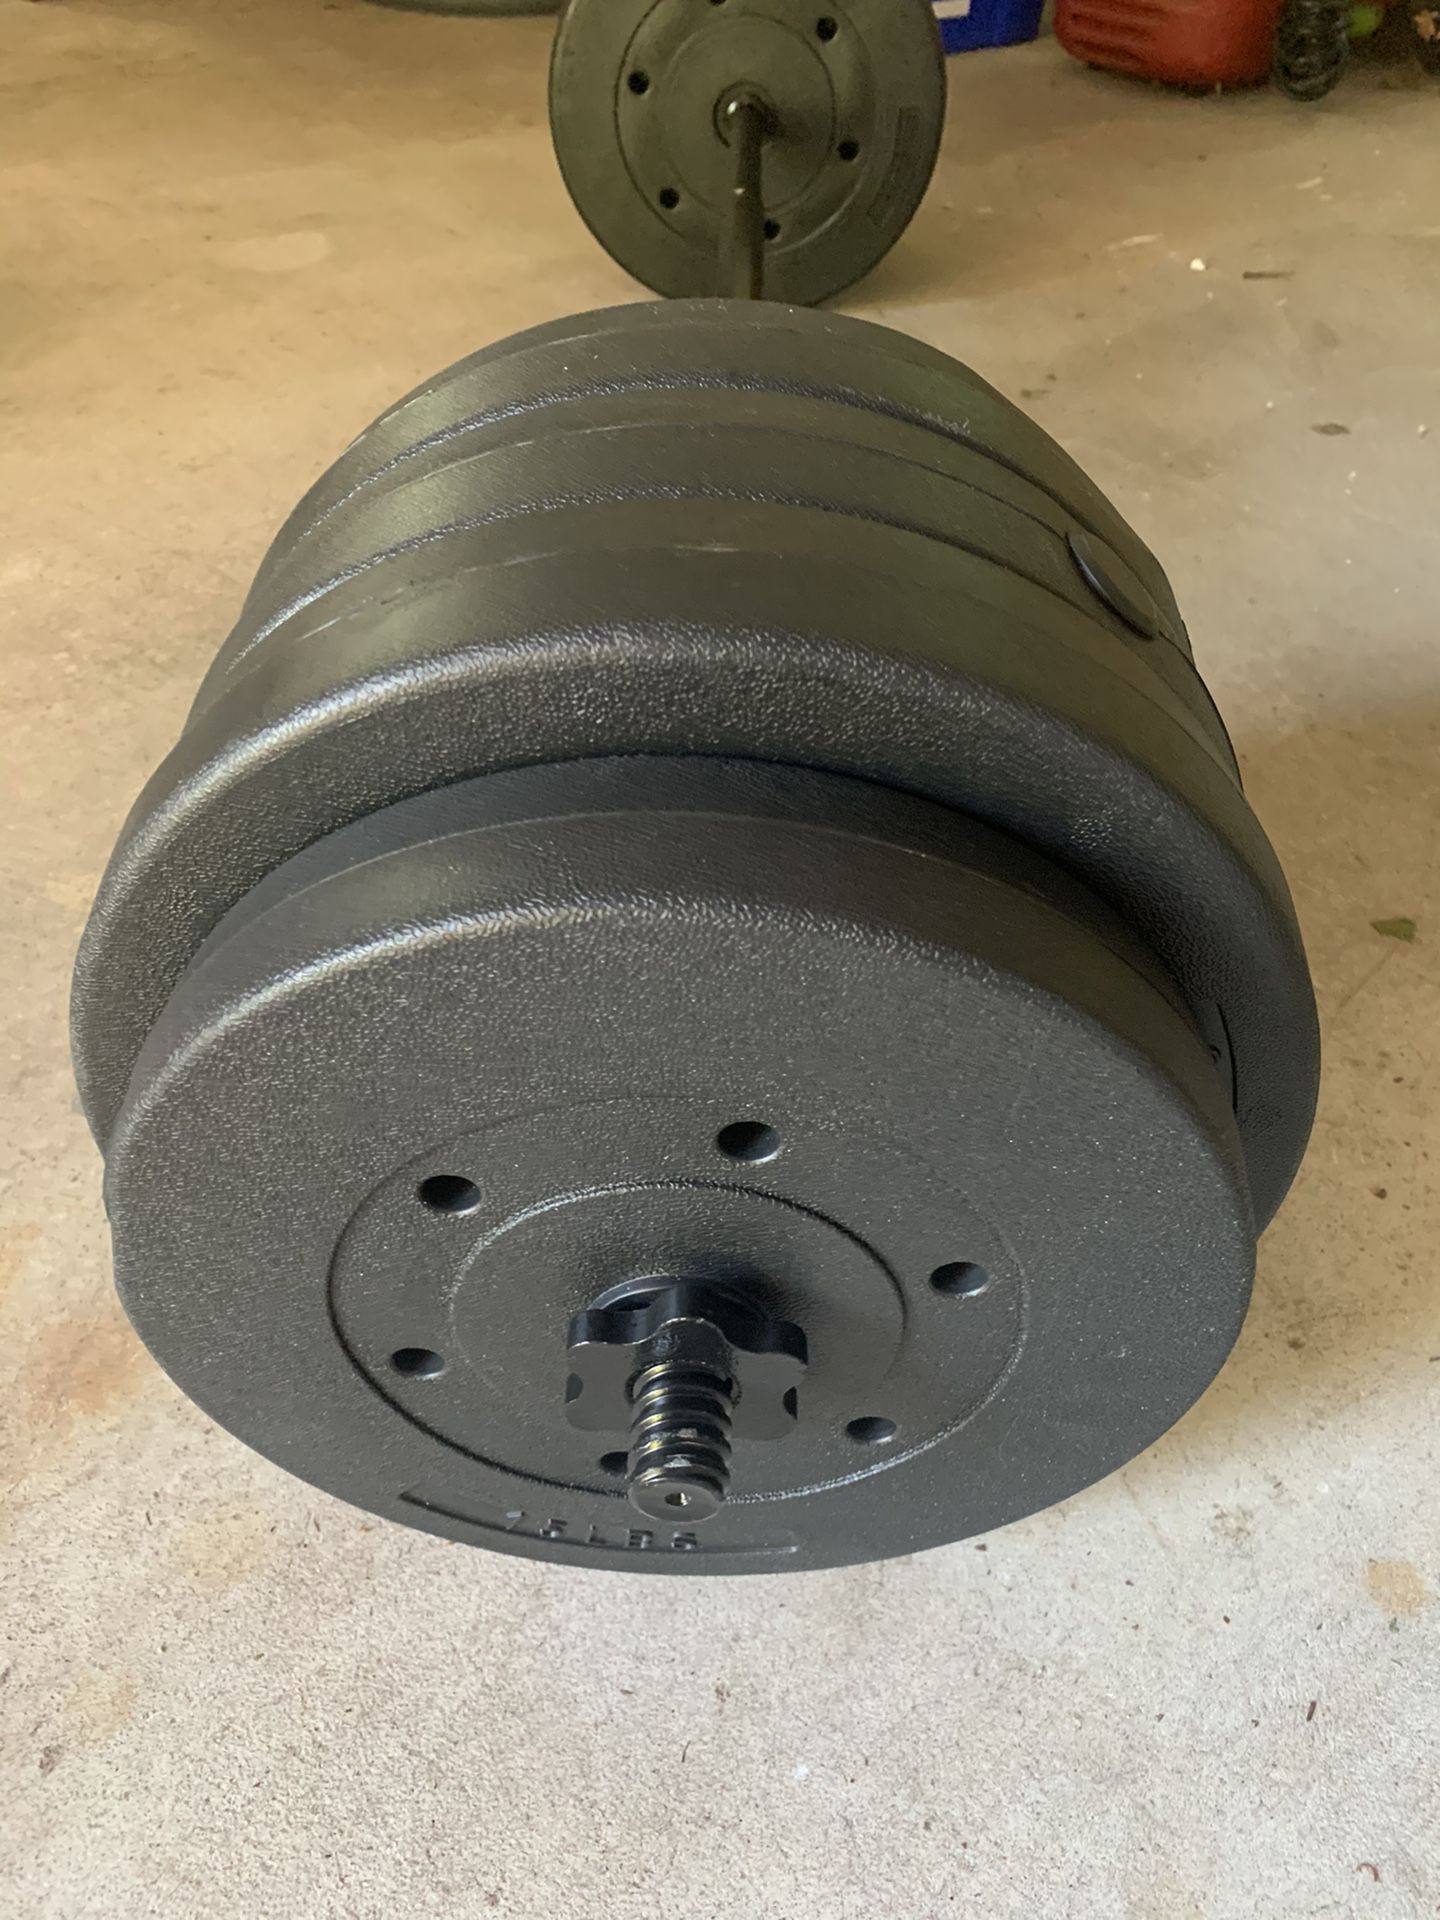 Build your own Barbell Sets BRAND NEW Up to 210lb Total! Pricing and information in description!